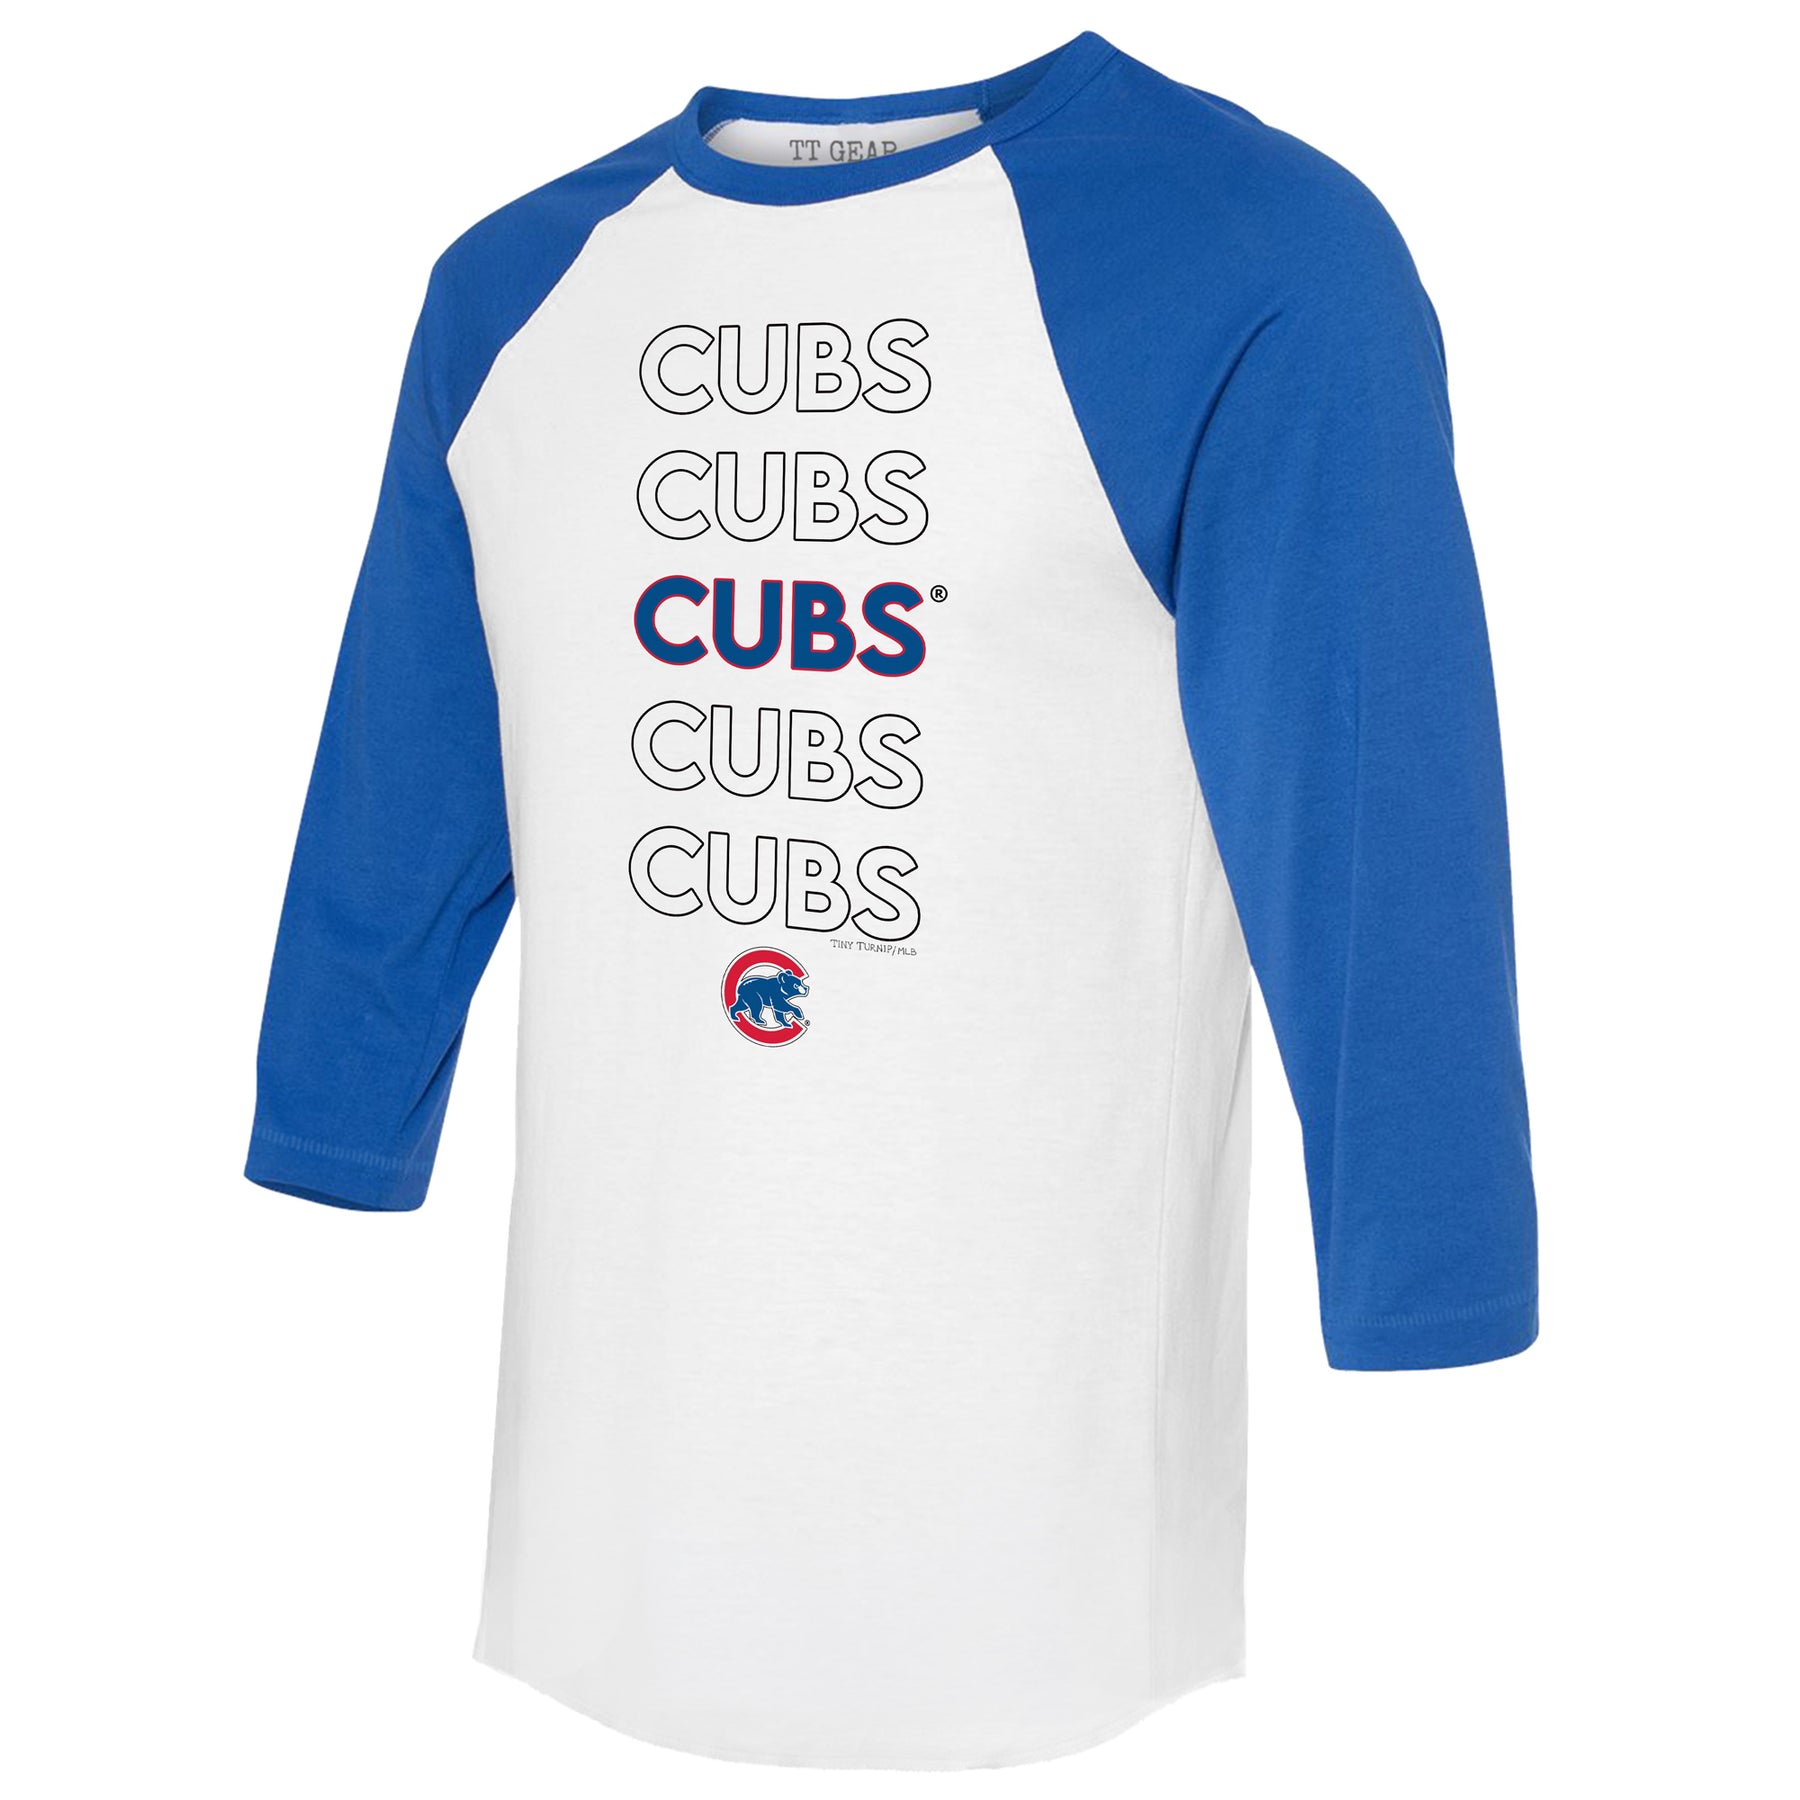 Chicago Cubs Stacked 3/4 Royal Blue Sleeve Raglan